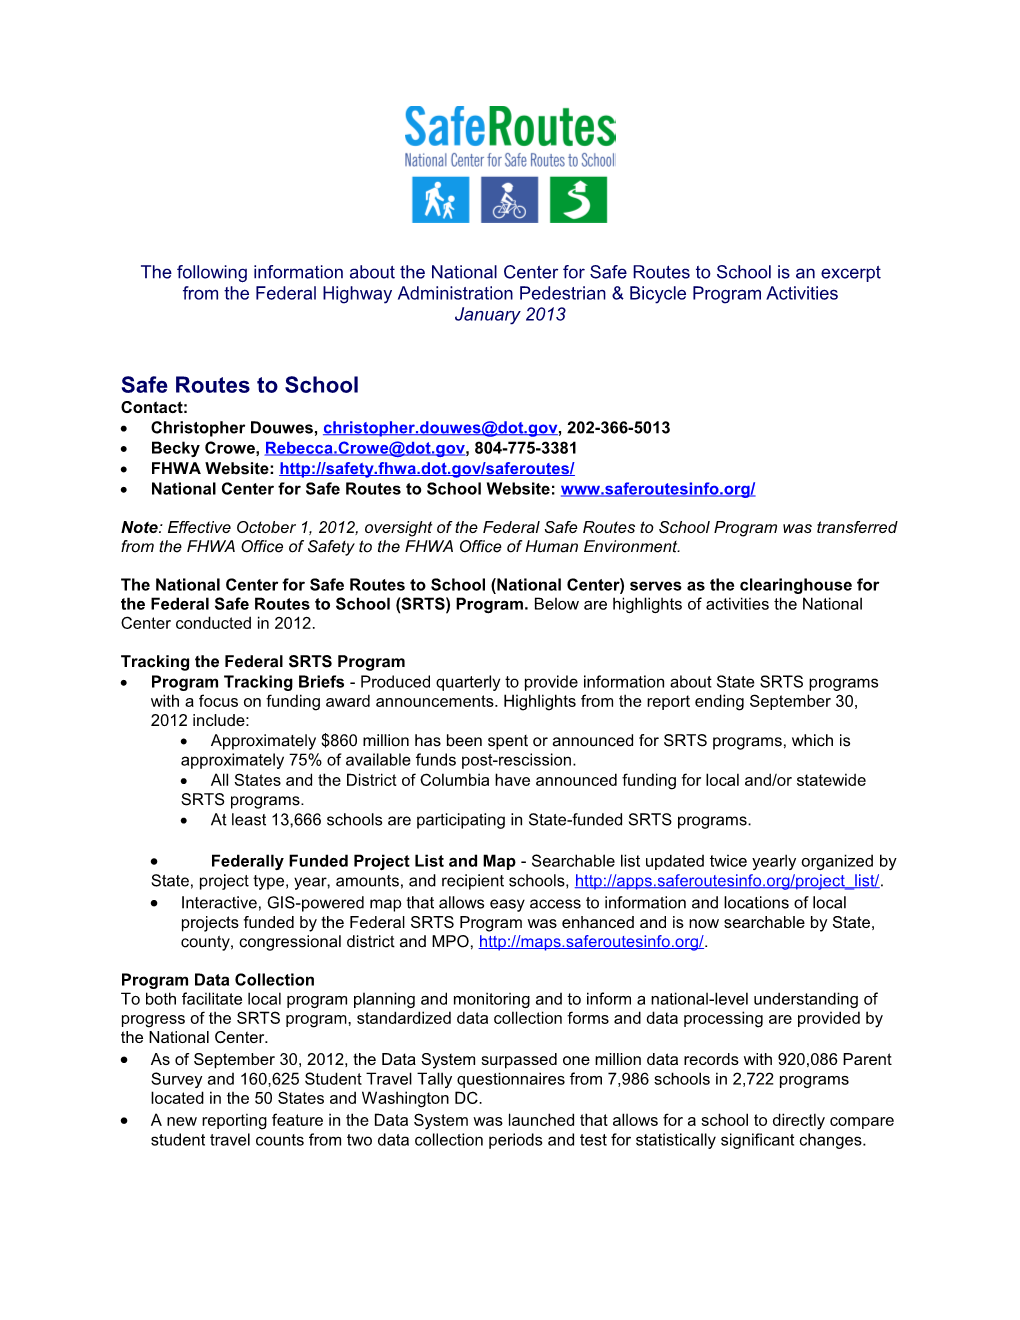 The Following Information About the National Center for Safe Routes to School Is an Excerpt